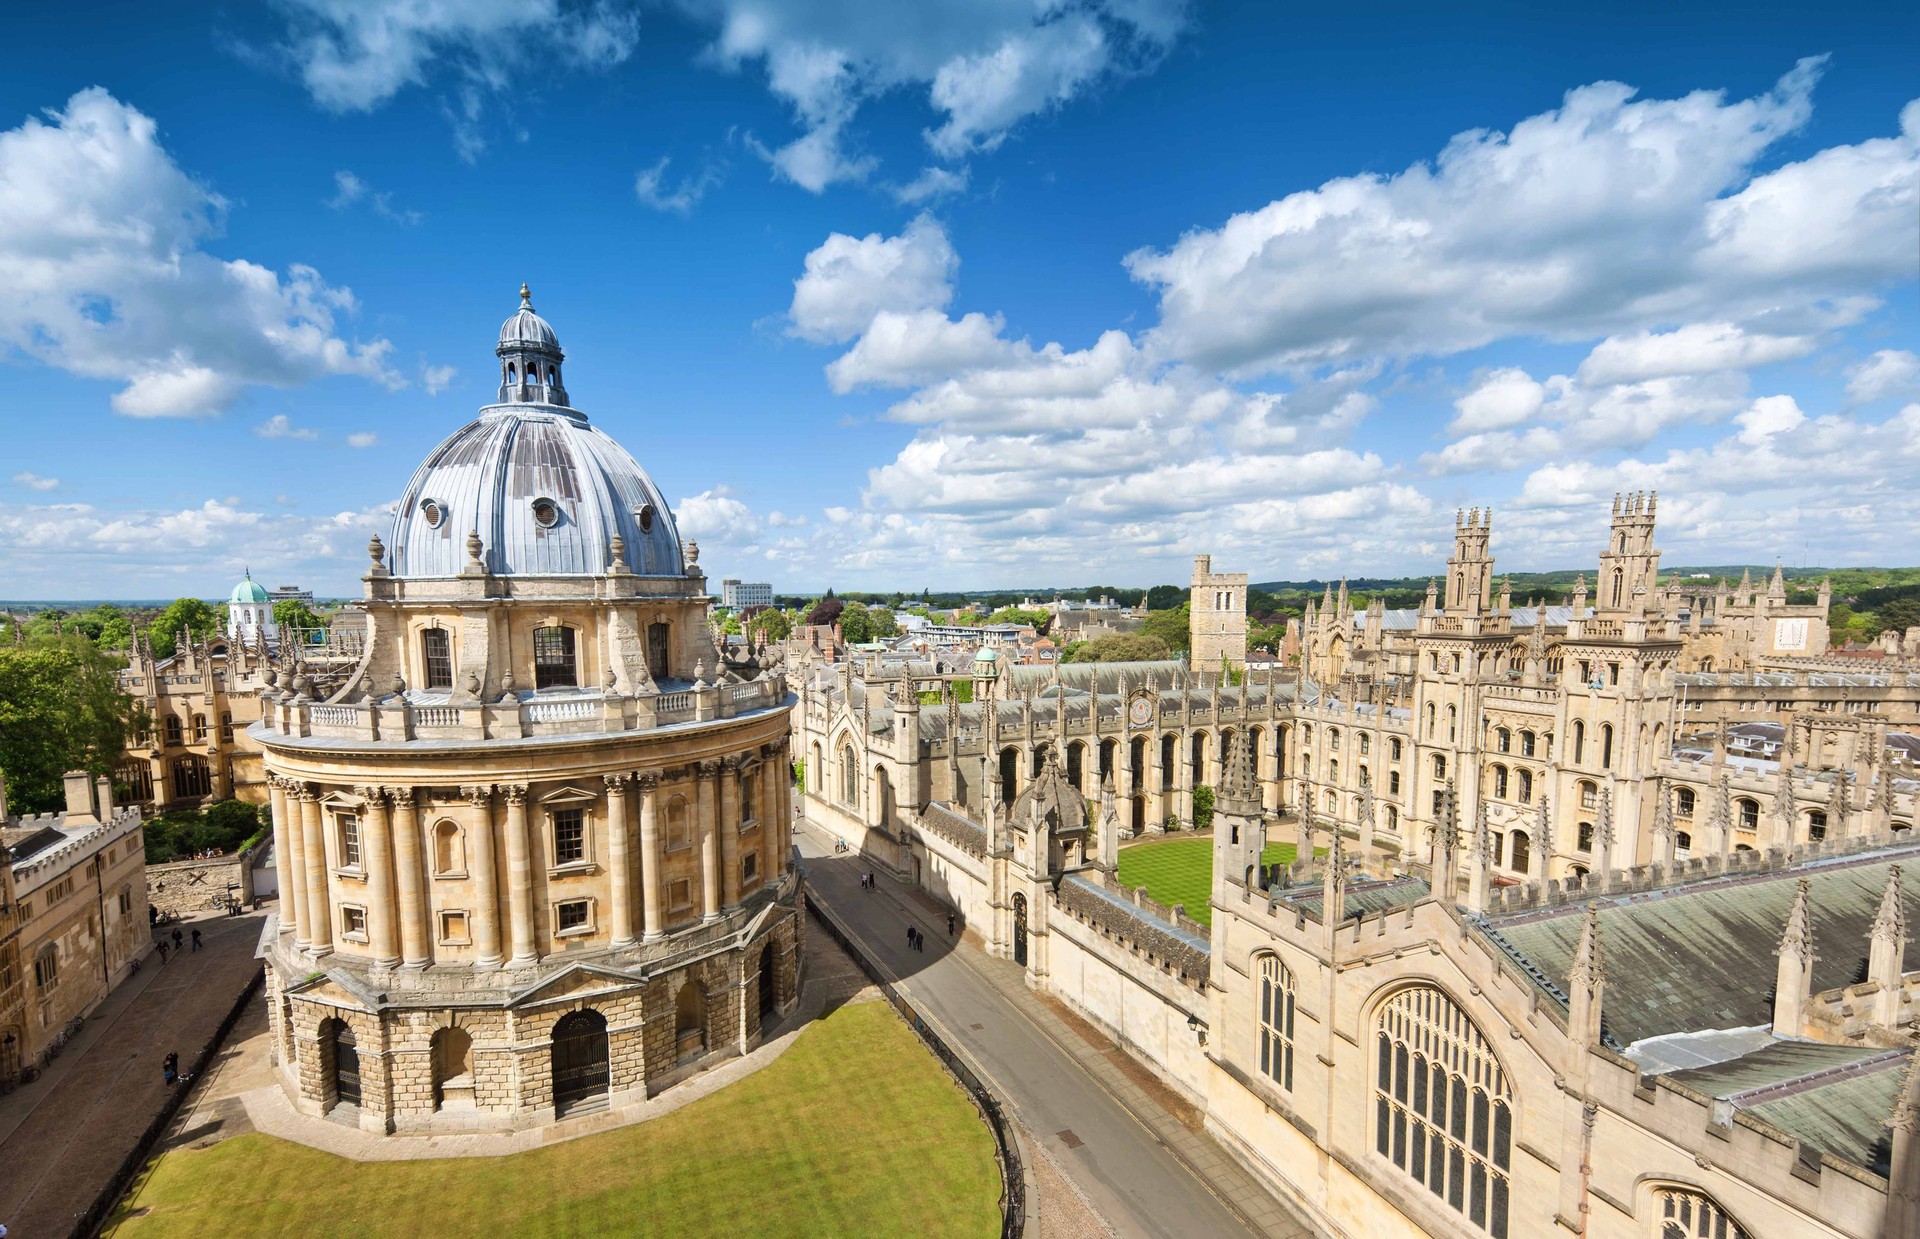 The dome structure in Radcliffe Square at the Oxford University campus